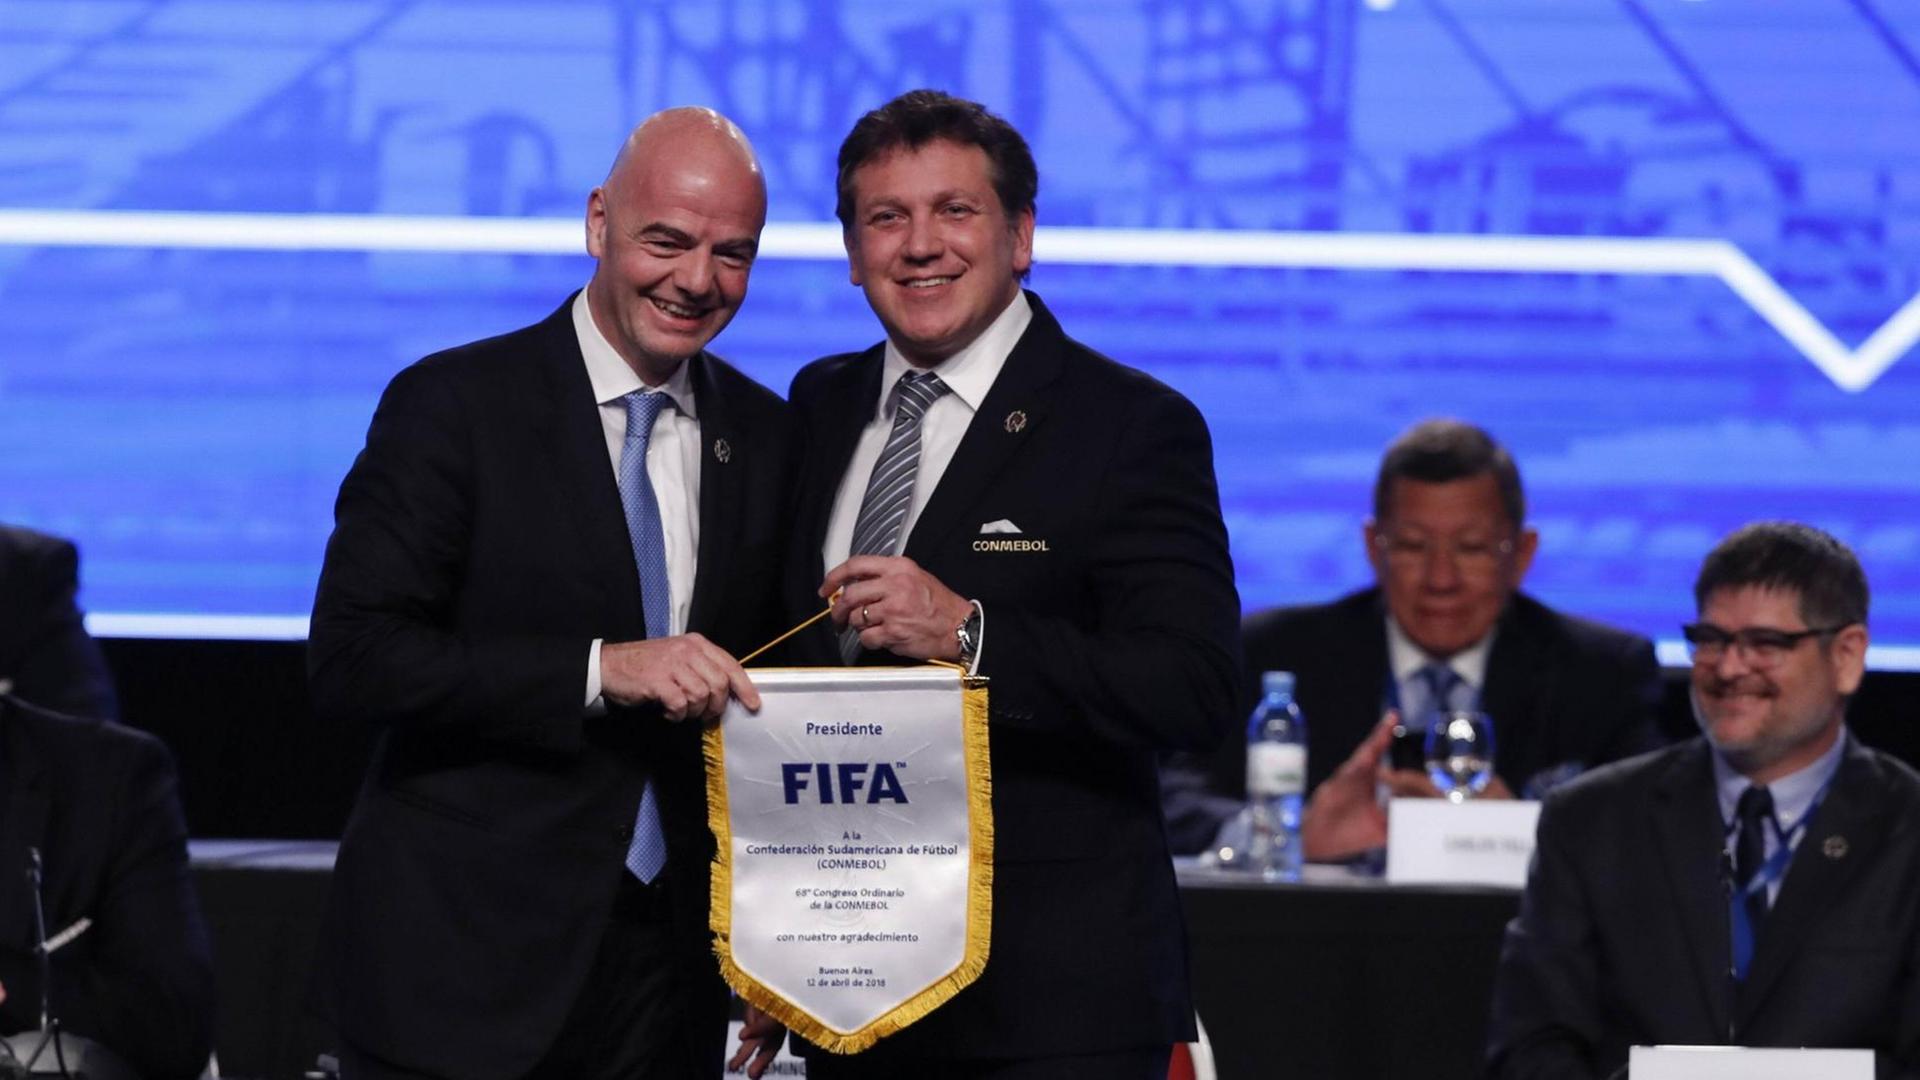 FIFA s President Gianni Infantino (L) poses with Conmebol s President Alejandro Dominguez during the start of the 68th Ordinary Congress of the South American Football Confederation (Conmebol), in Buenos Aires, Argentina, on 12 April 2018. The Conmebol awarded Argentiniain President Mauricio Macri its highest decoration today, for his contribution to South American football as president of Boca Juniors (1995-2008) at the beginning of the 68th Ordinary Congress of the entity. Conmebol gives maximum award to Macri for his contribution to soccer !ACHTUNG: NUR REDAKTIONELLE NUTZUNG! PUBLICATIONxINxGERxSUIxAUTxONLY Copyright: xDavidxFernandezx BAS03 20180412-636591584544042916